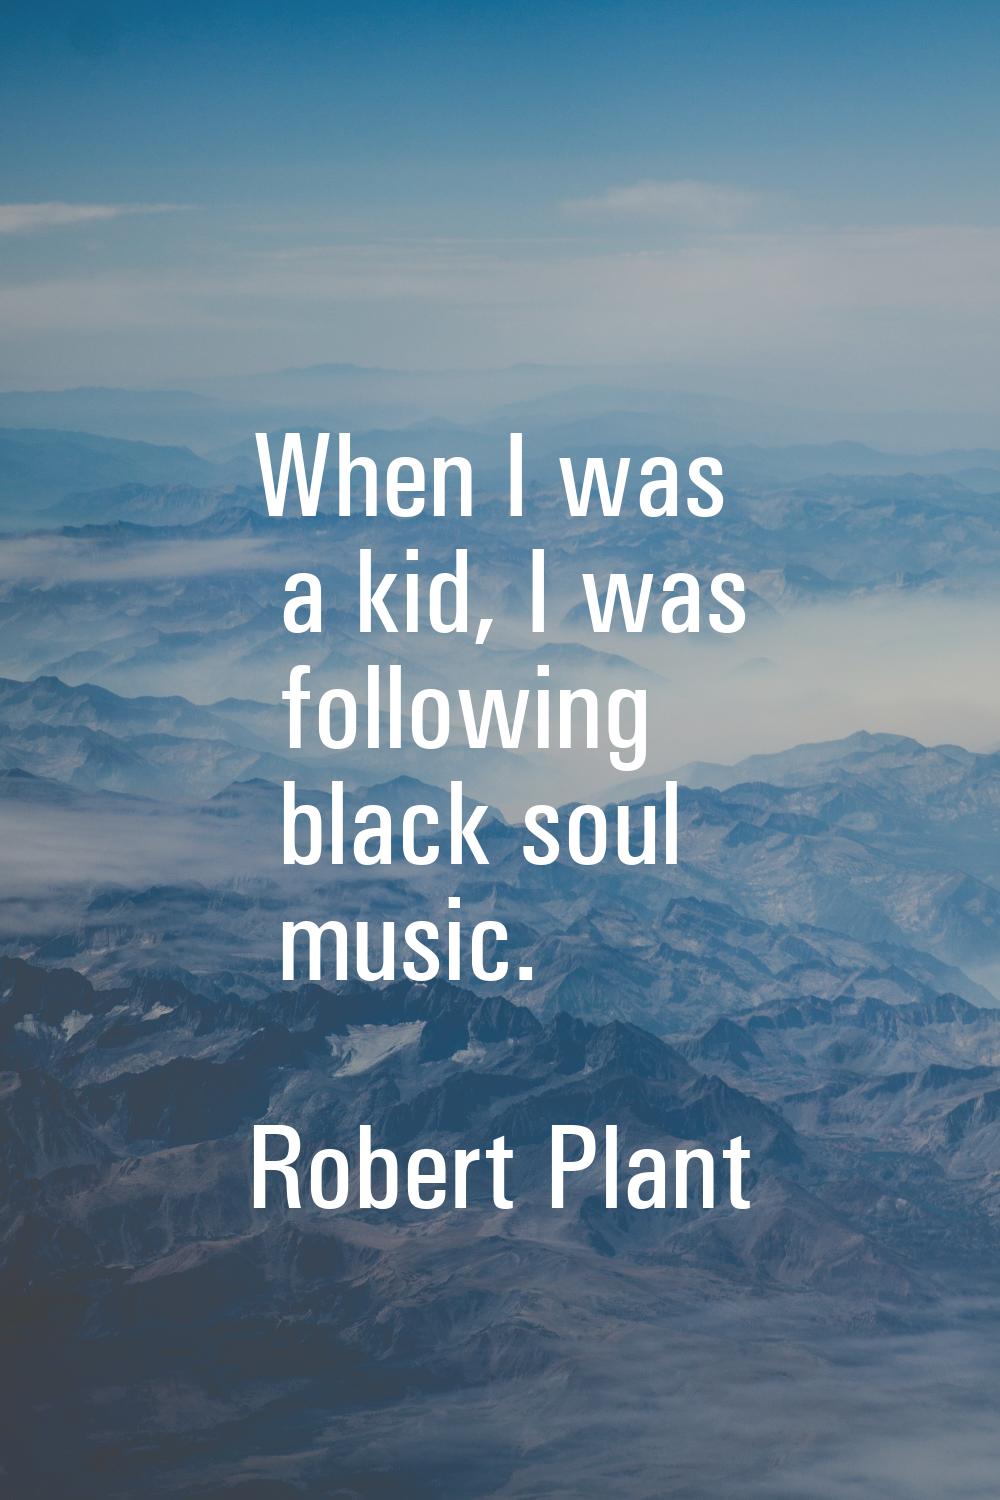 When I was a kid, I was following black soul music.